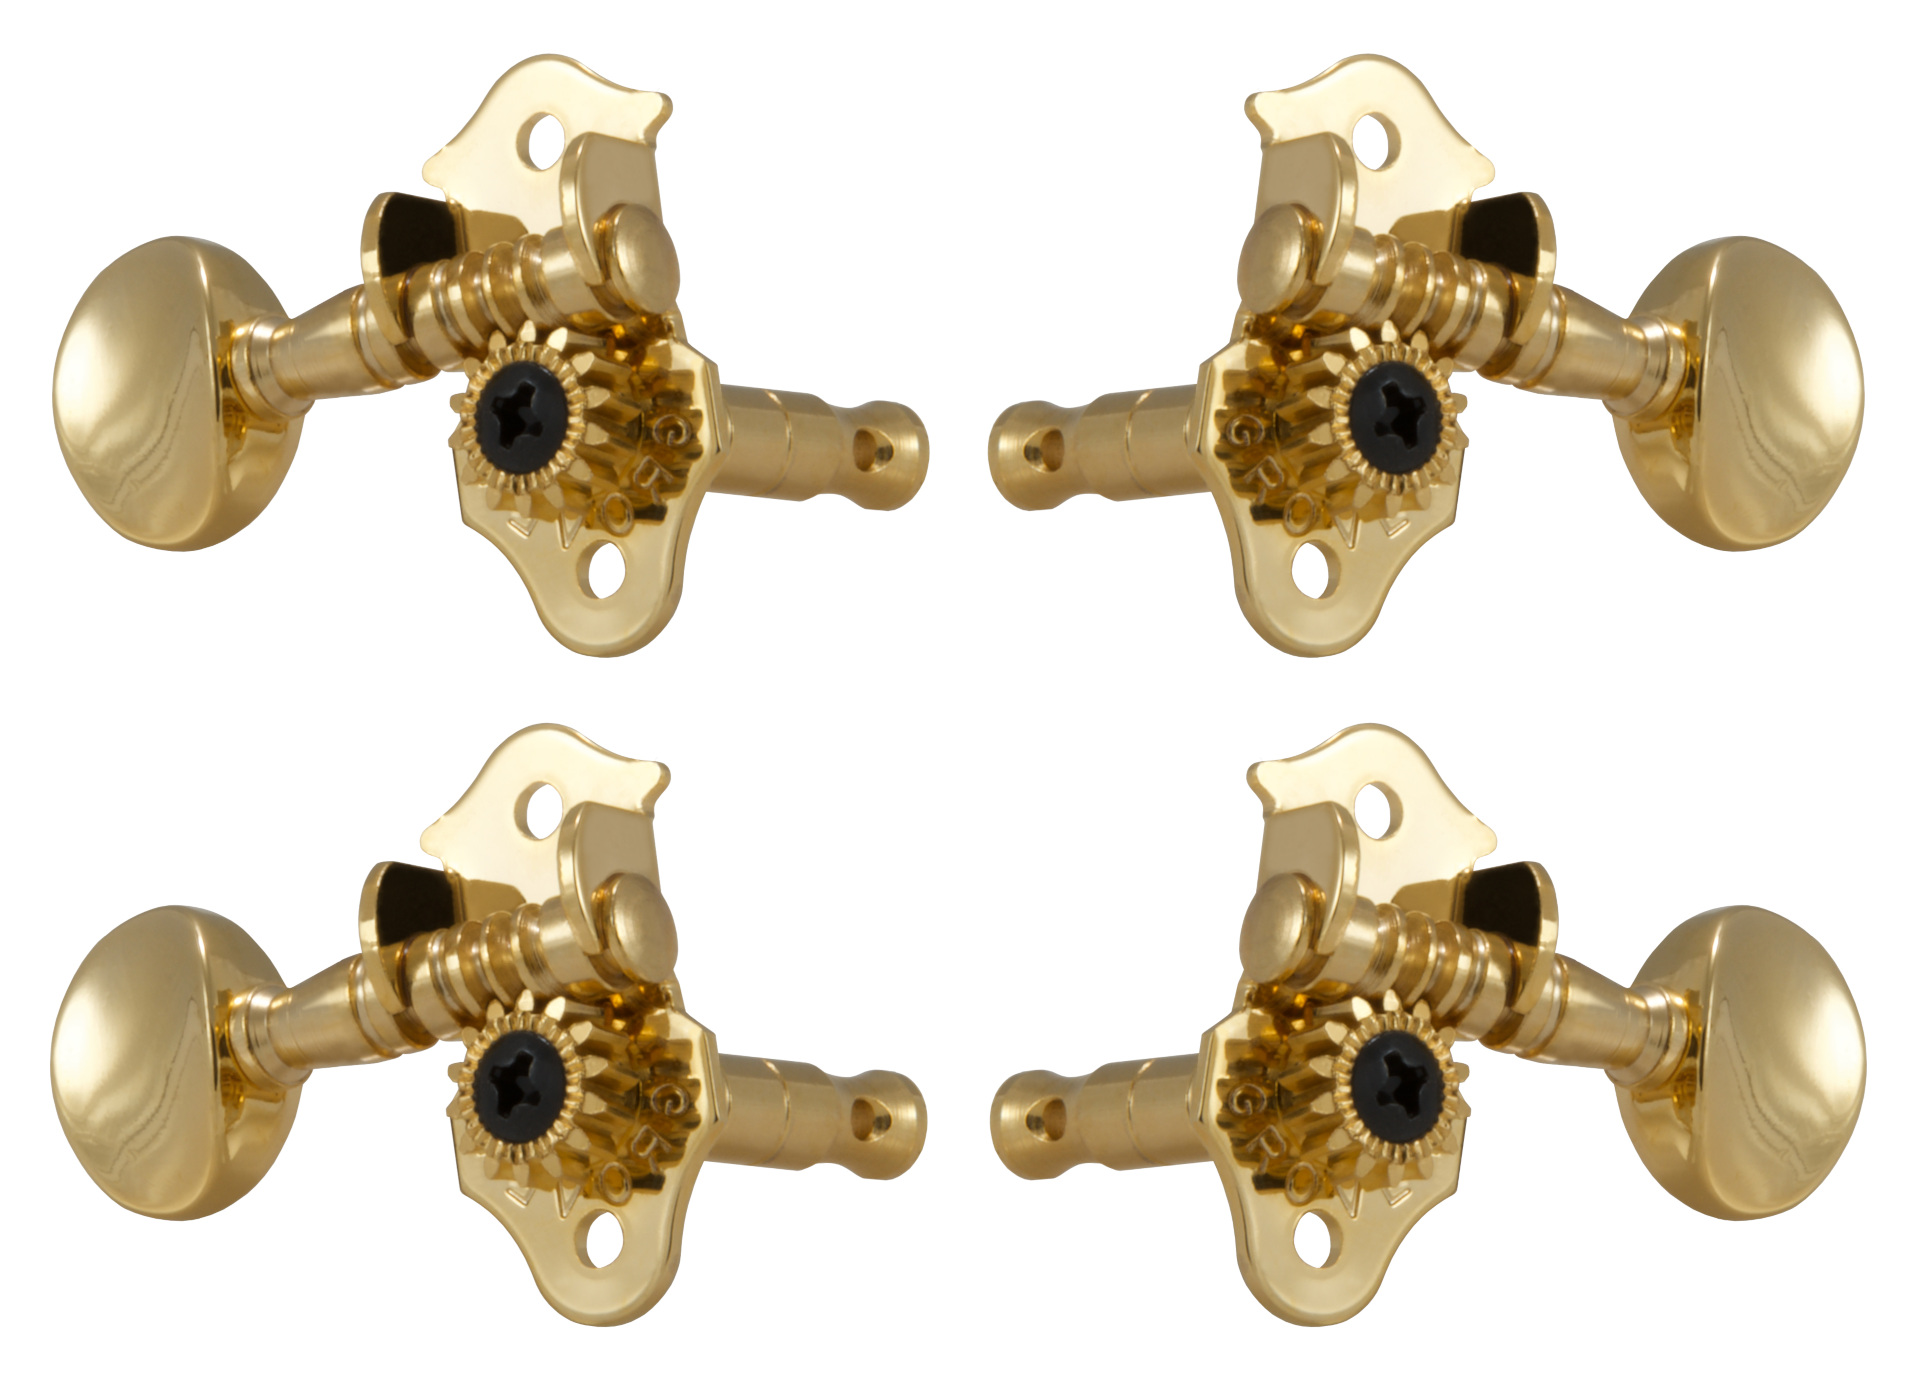 Grover 8G Sta-Tite Geared Ukulele Pegs with Metal Button - 4 pcs. - Gold